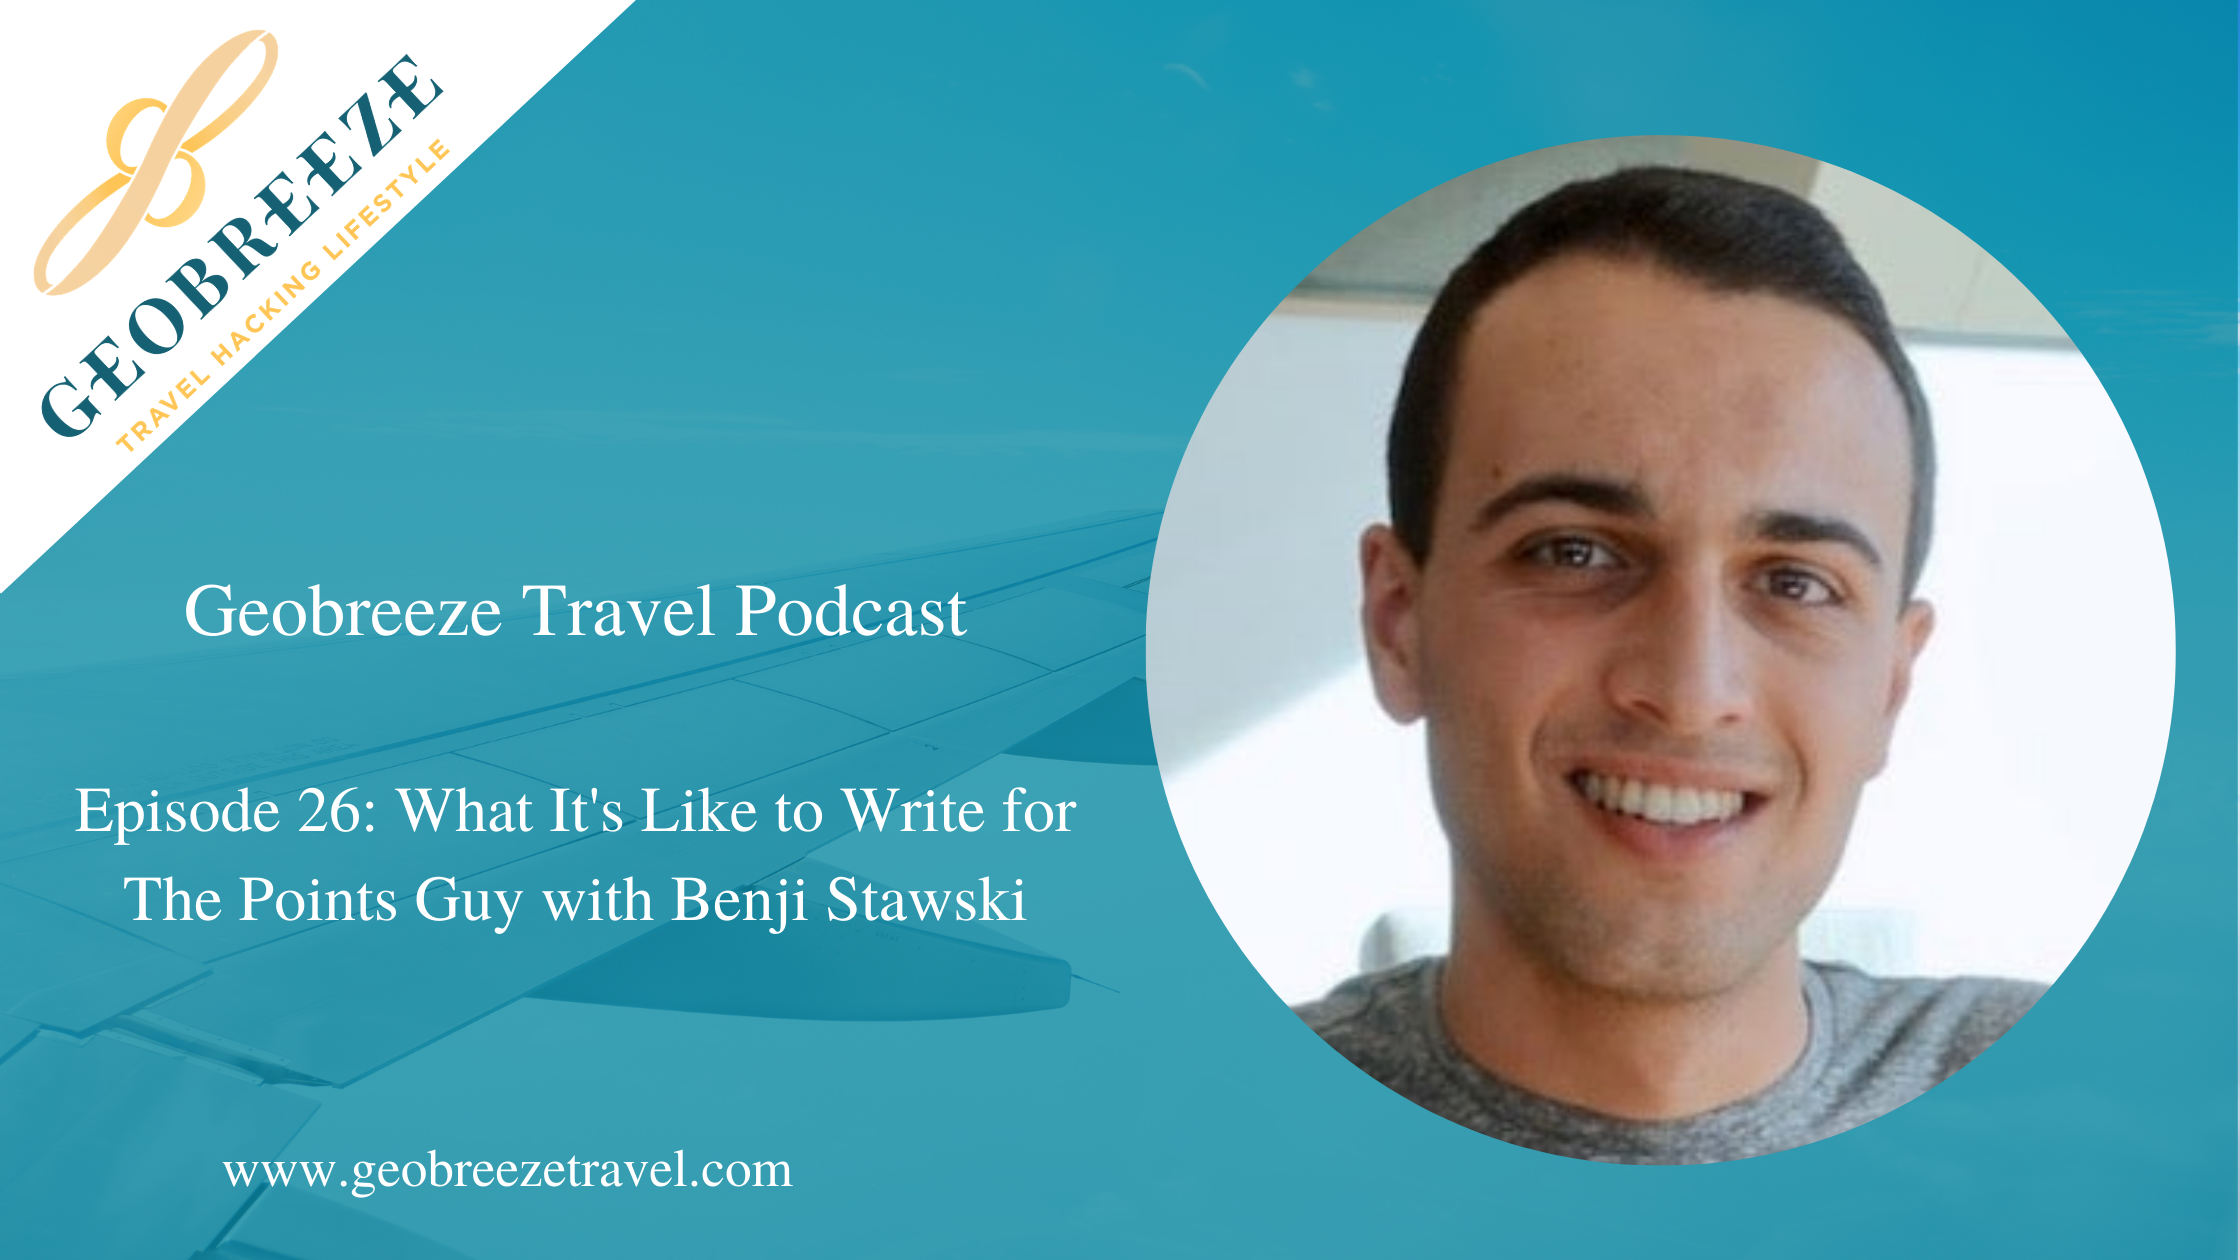 Episode 26: What It’s Like to Write for The Points Guy with Benji Stawski